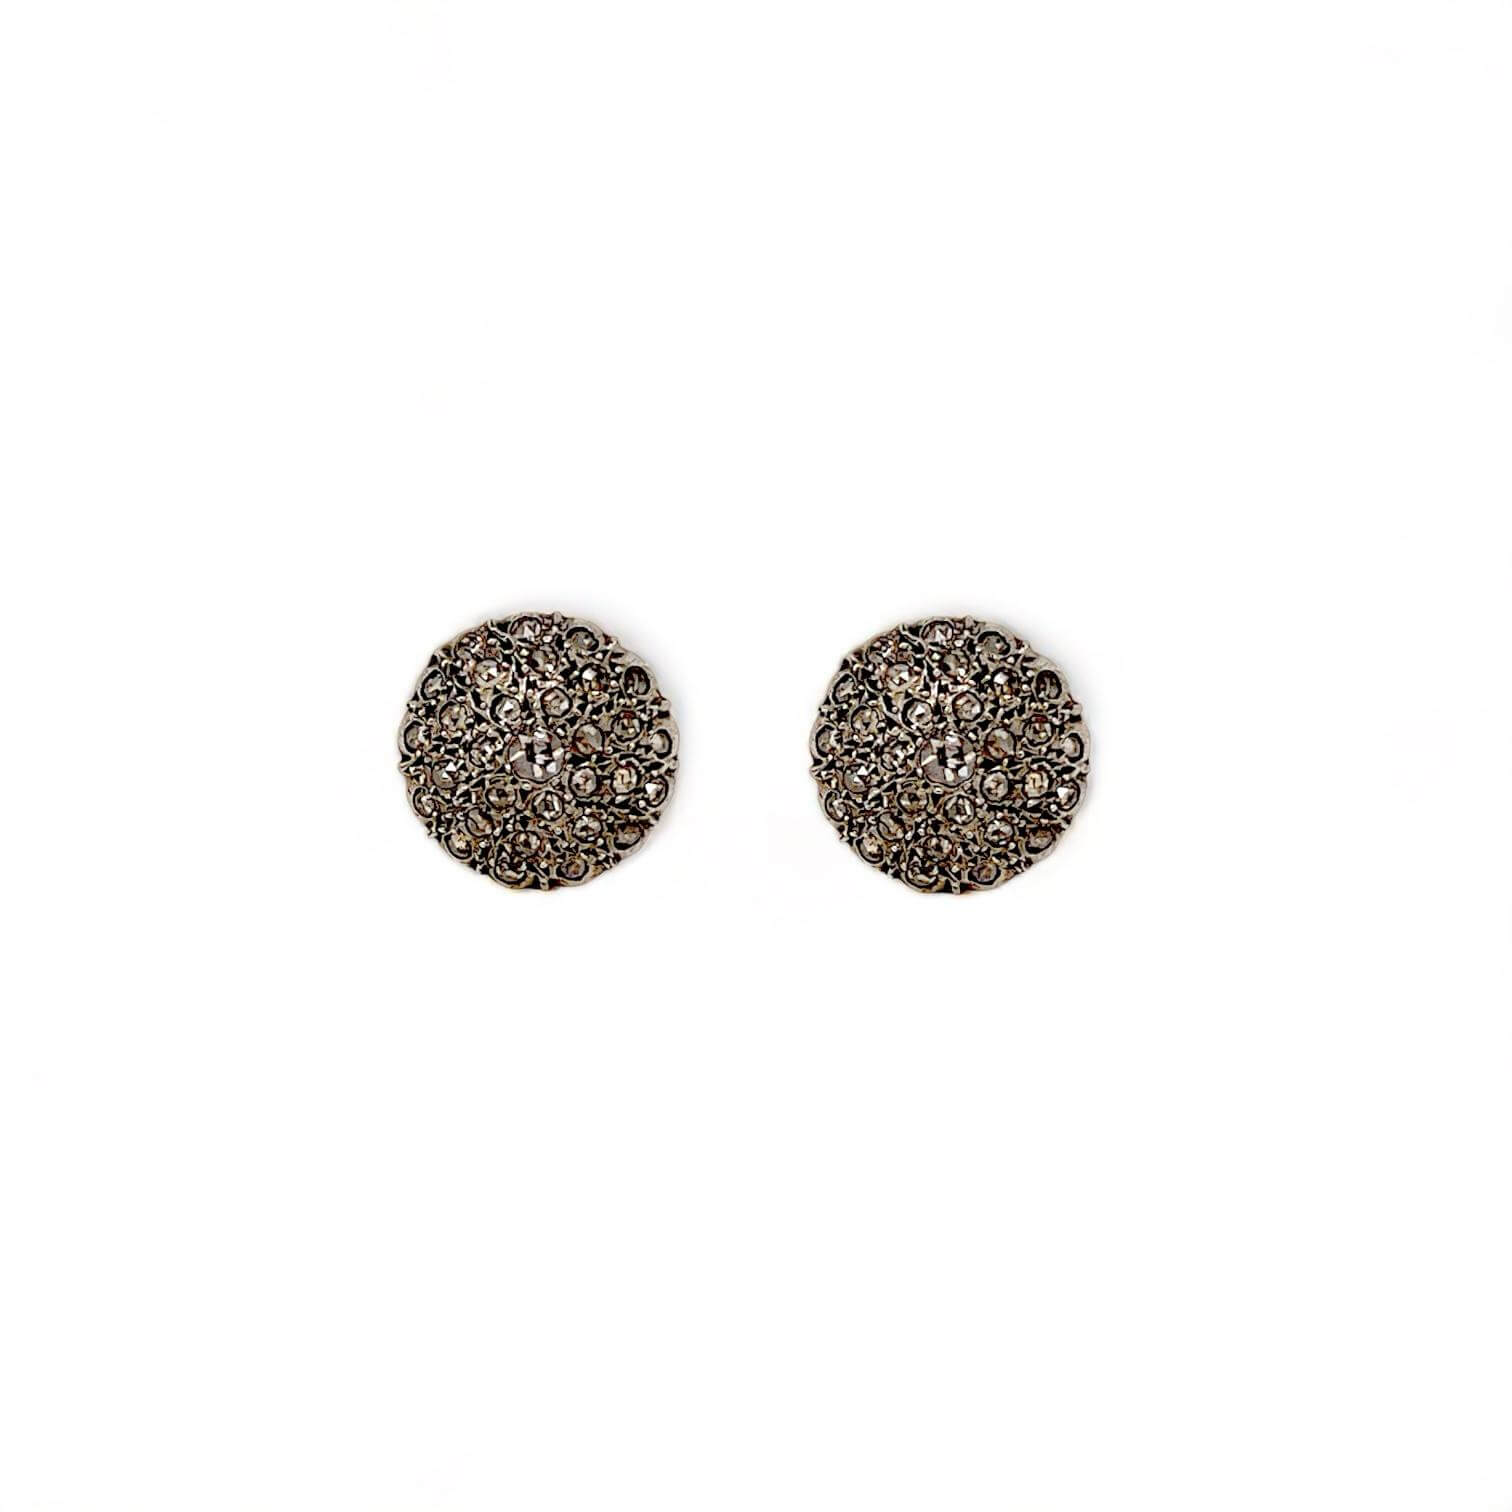 Gold and Diamond Patch Earrings Art. 513474